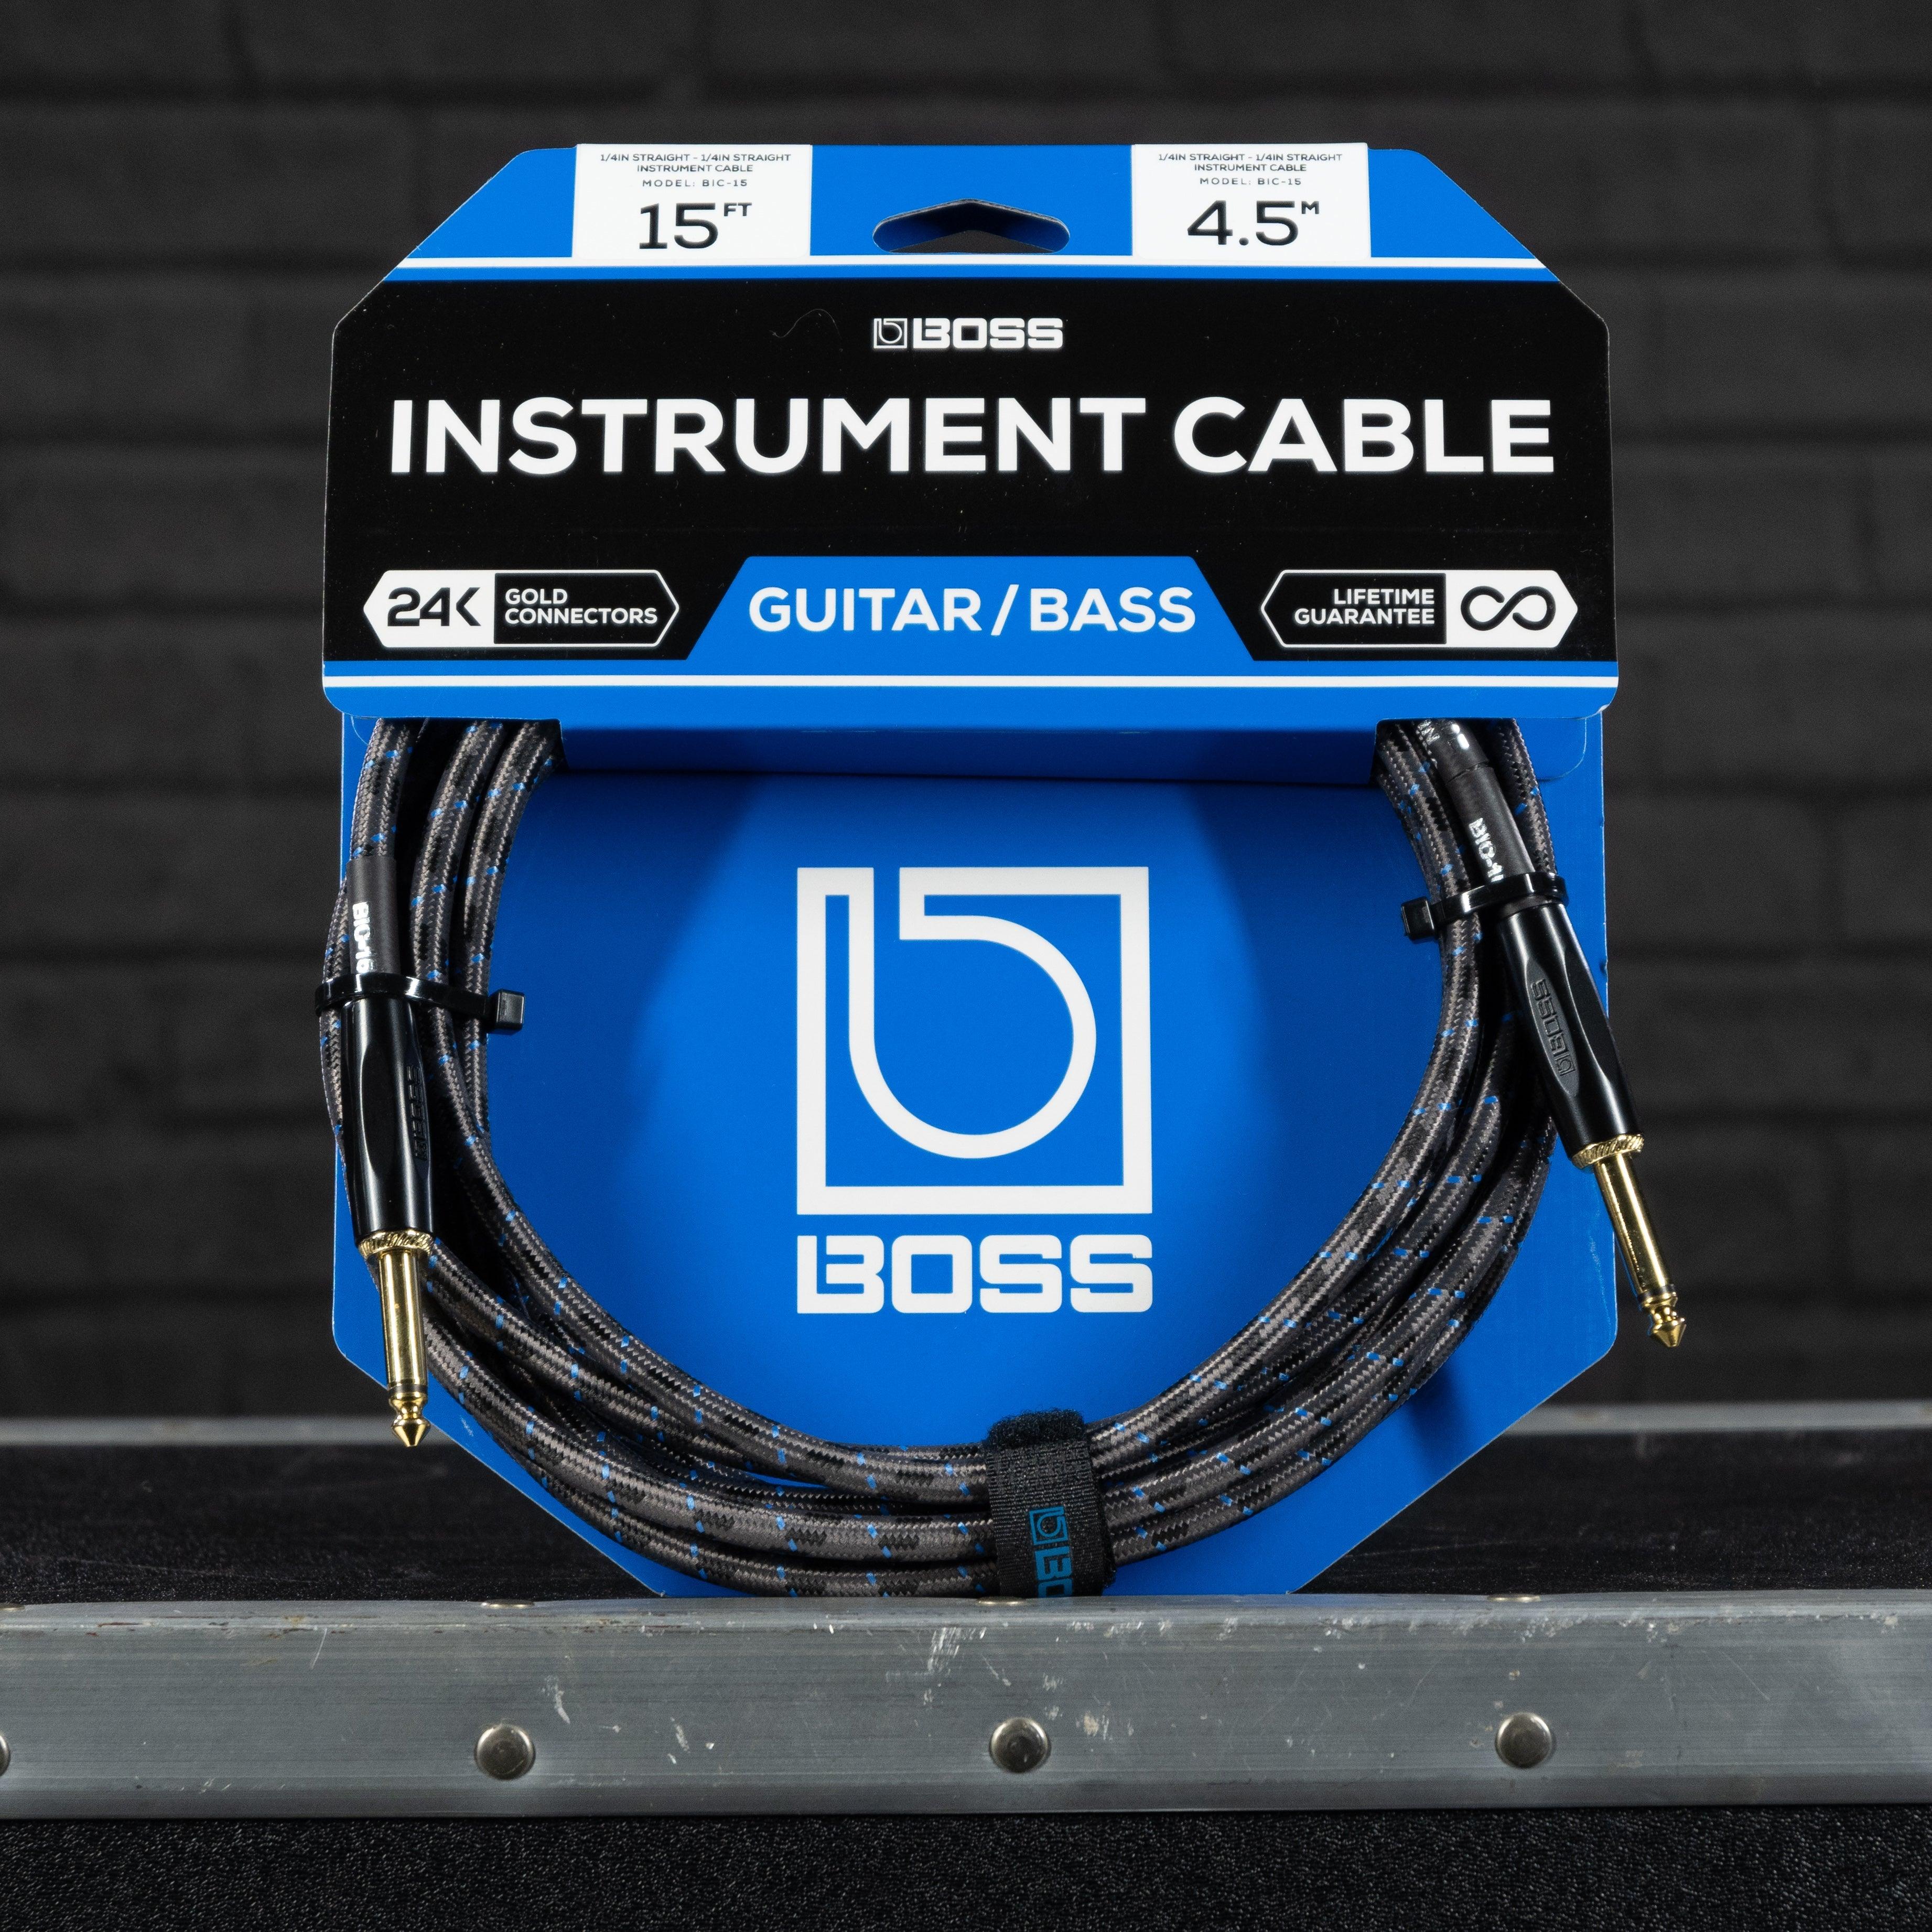 Boss BIC-15 Instrument Cable 15 Feet - Impulse Music Co.